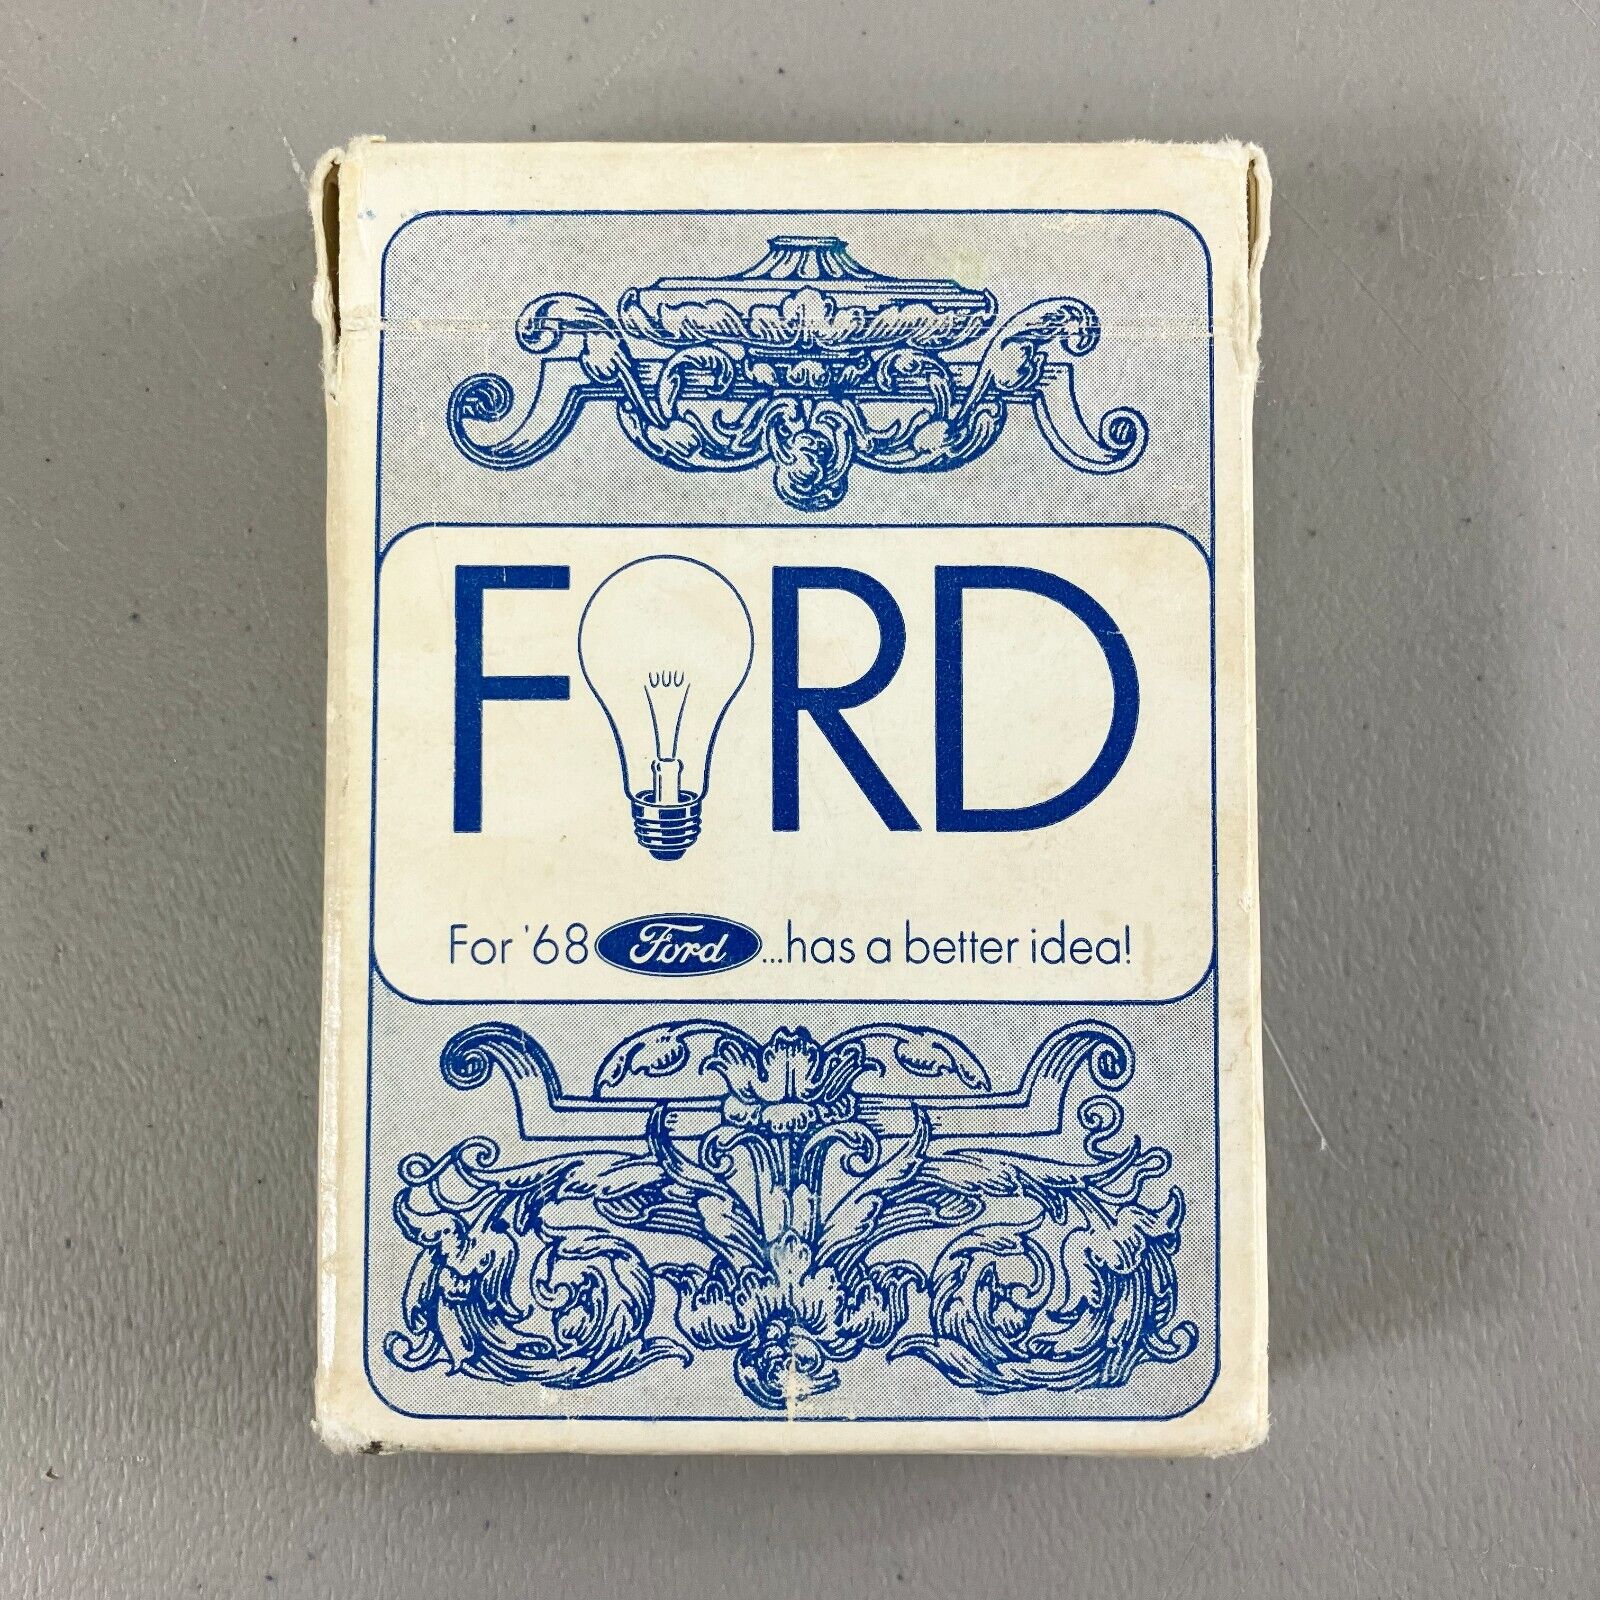 Vintage 1968 Arrco Playing Card Deck, Ford Motor Company